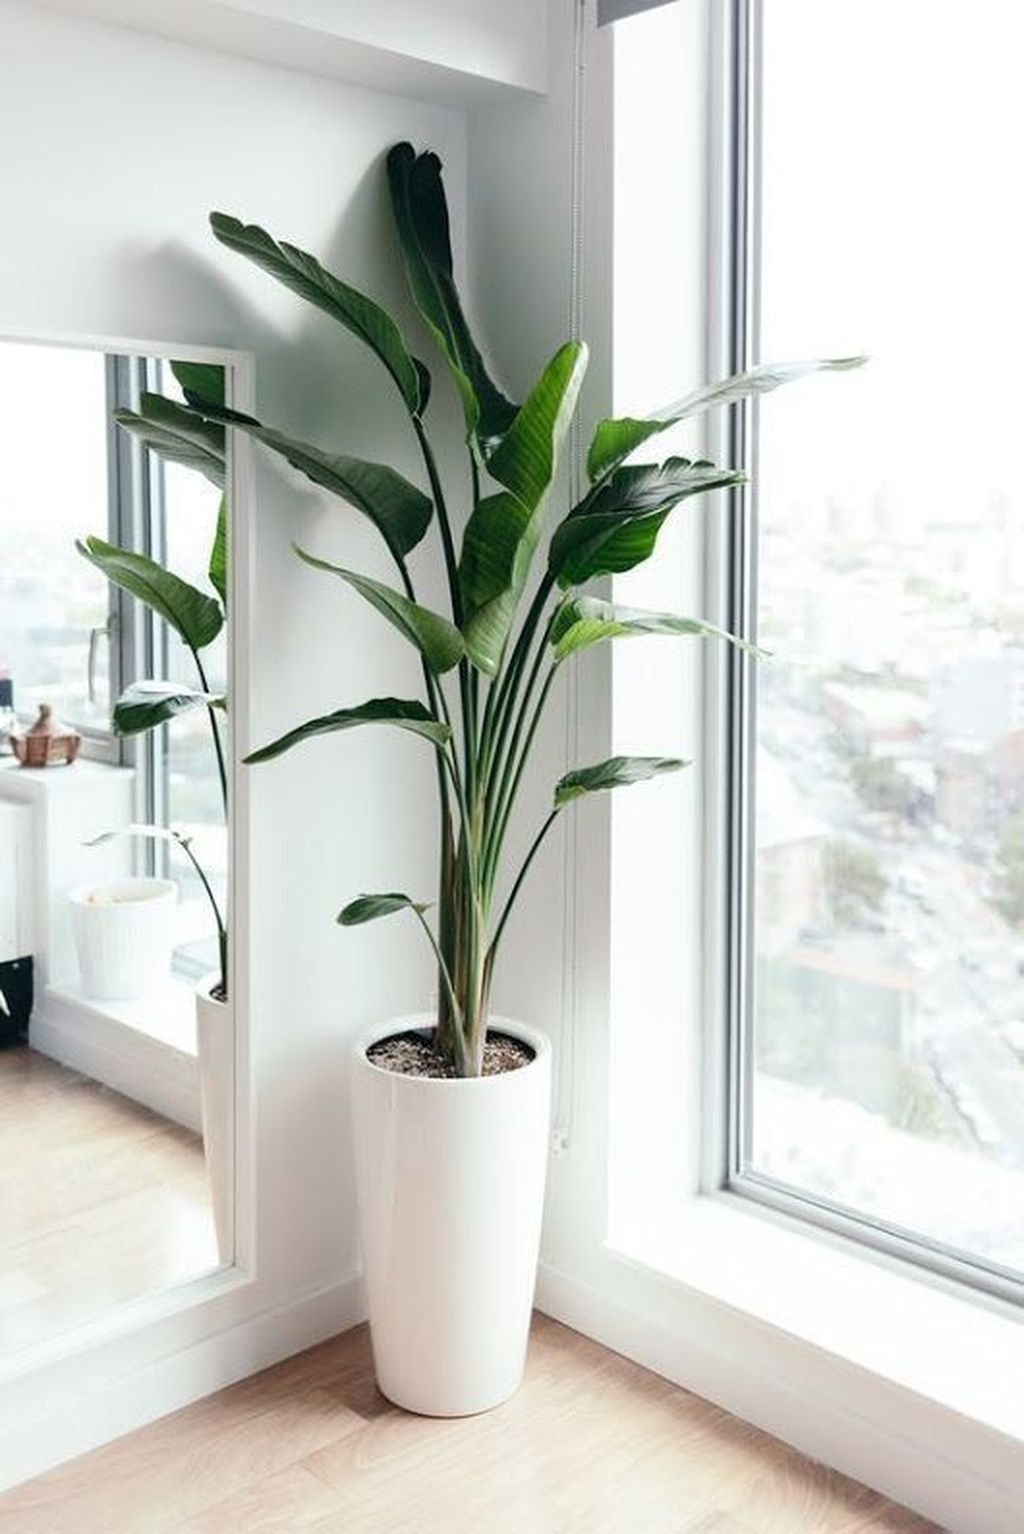 Awesome Indoor Plant Decoration Ideas To Make Natural Comfort In Your Home07